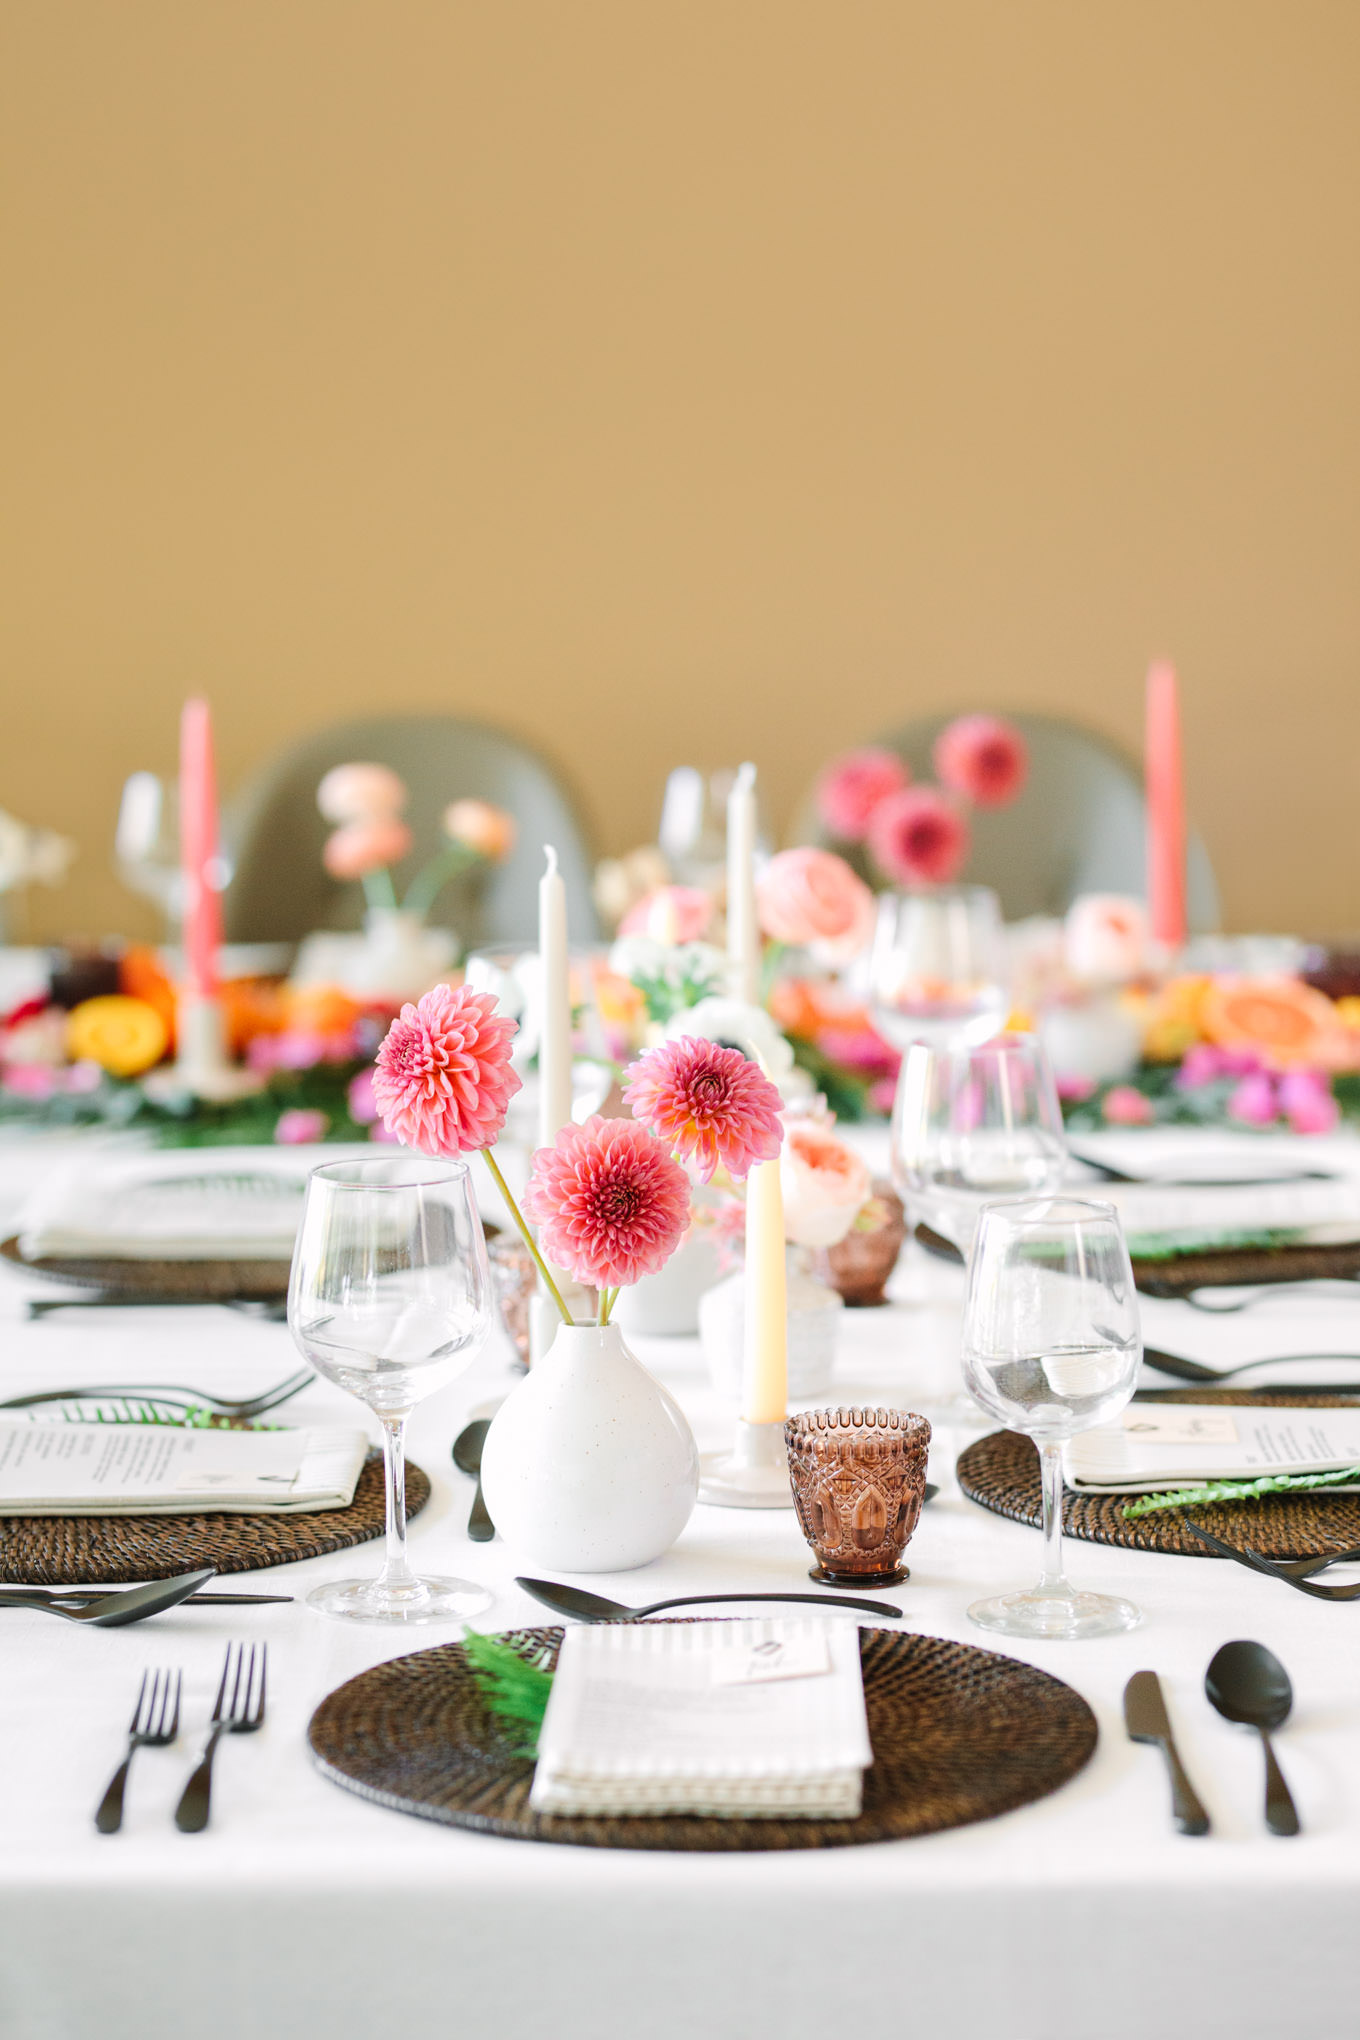 Dinner table at Malibu micro wedding | Engagement, elopement, and wedding photography roundup of Mary Costa’s favorite images from 2020 | Colorful and elevated photography for fun-loving couples in Southern California | #2020wedding #elopement #weddingphoto #weddingphotography #microwedding   Source: Mary Costa Photography | Los Angeles